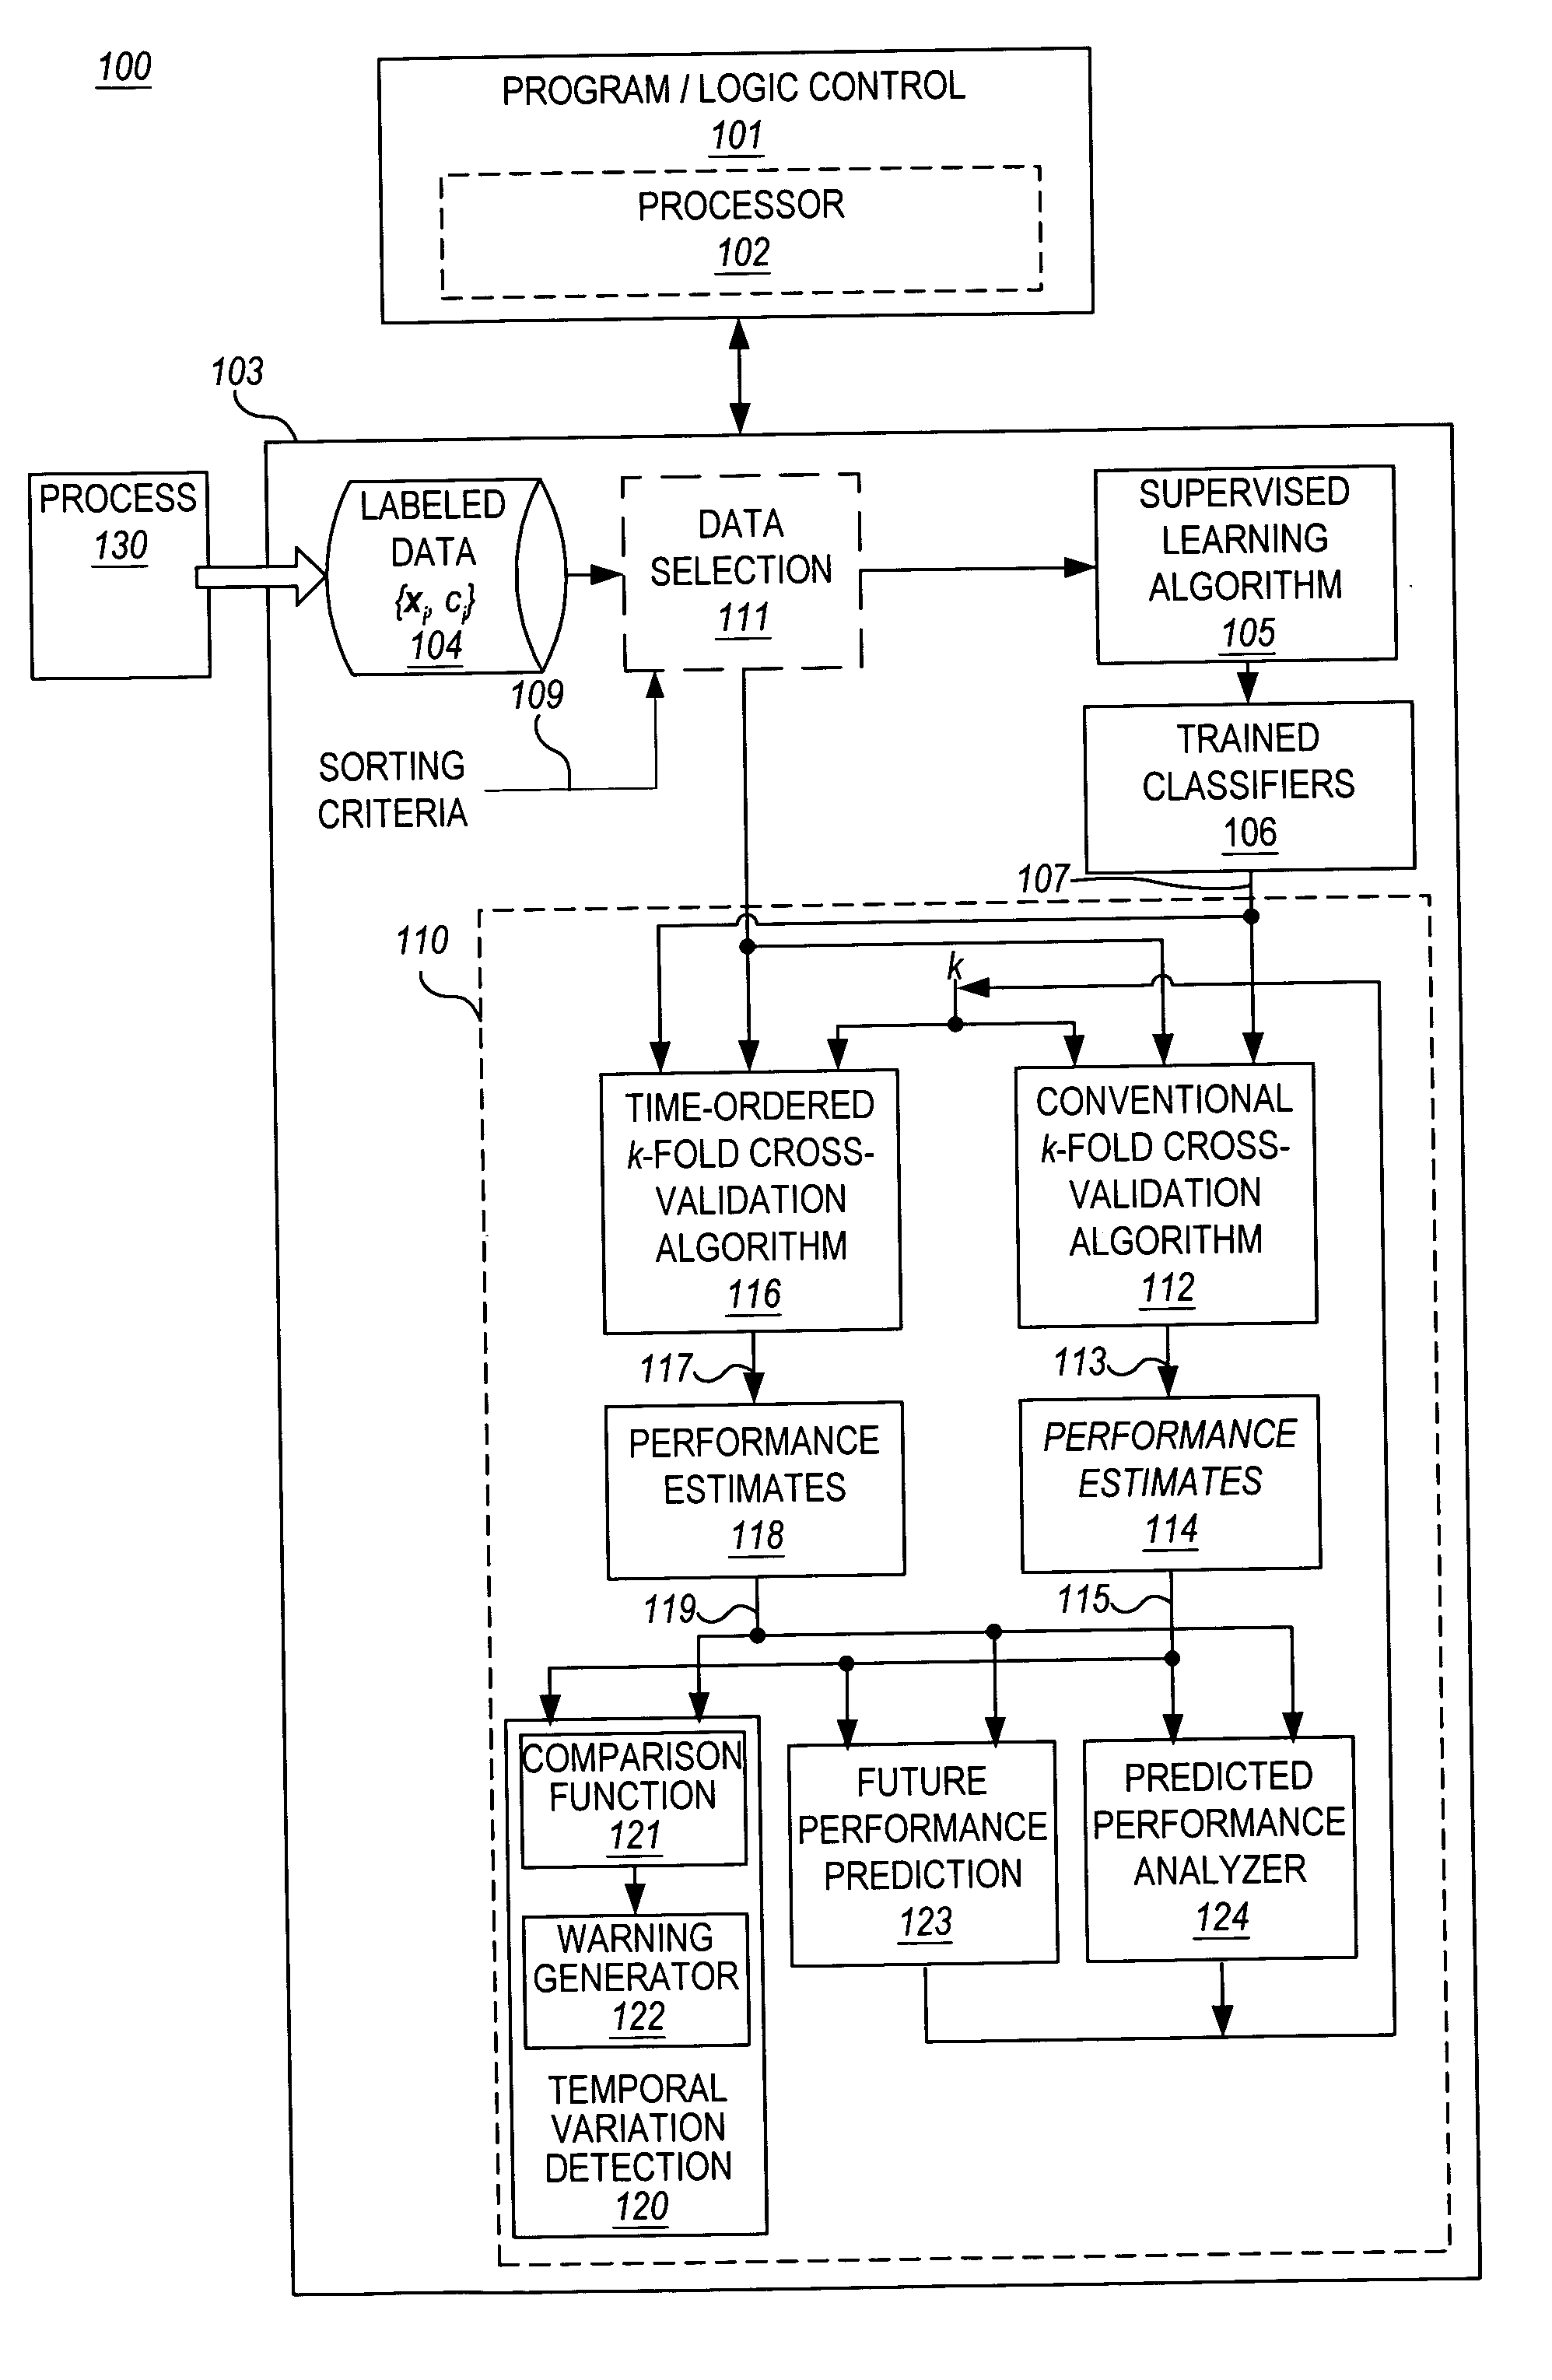 Methods and apparatus for detecting temporal process variation and for managing and predicting performance of automatic classifiers